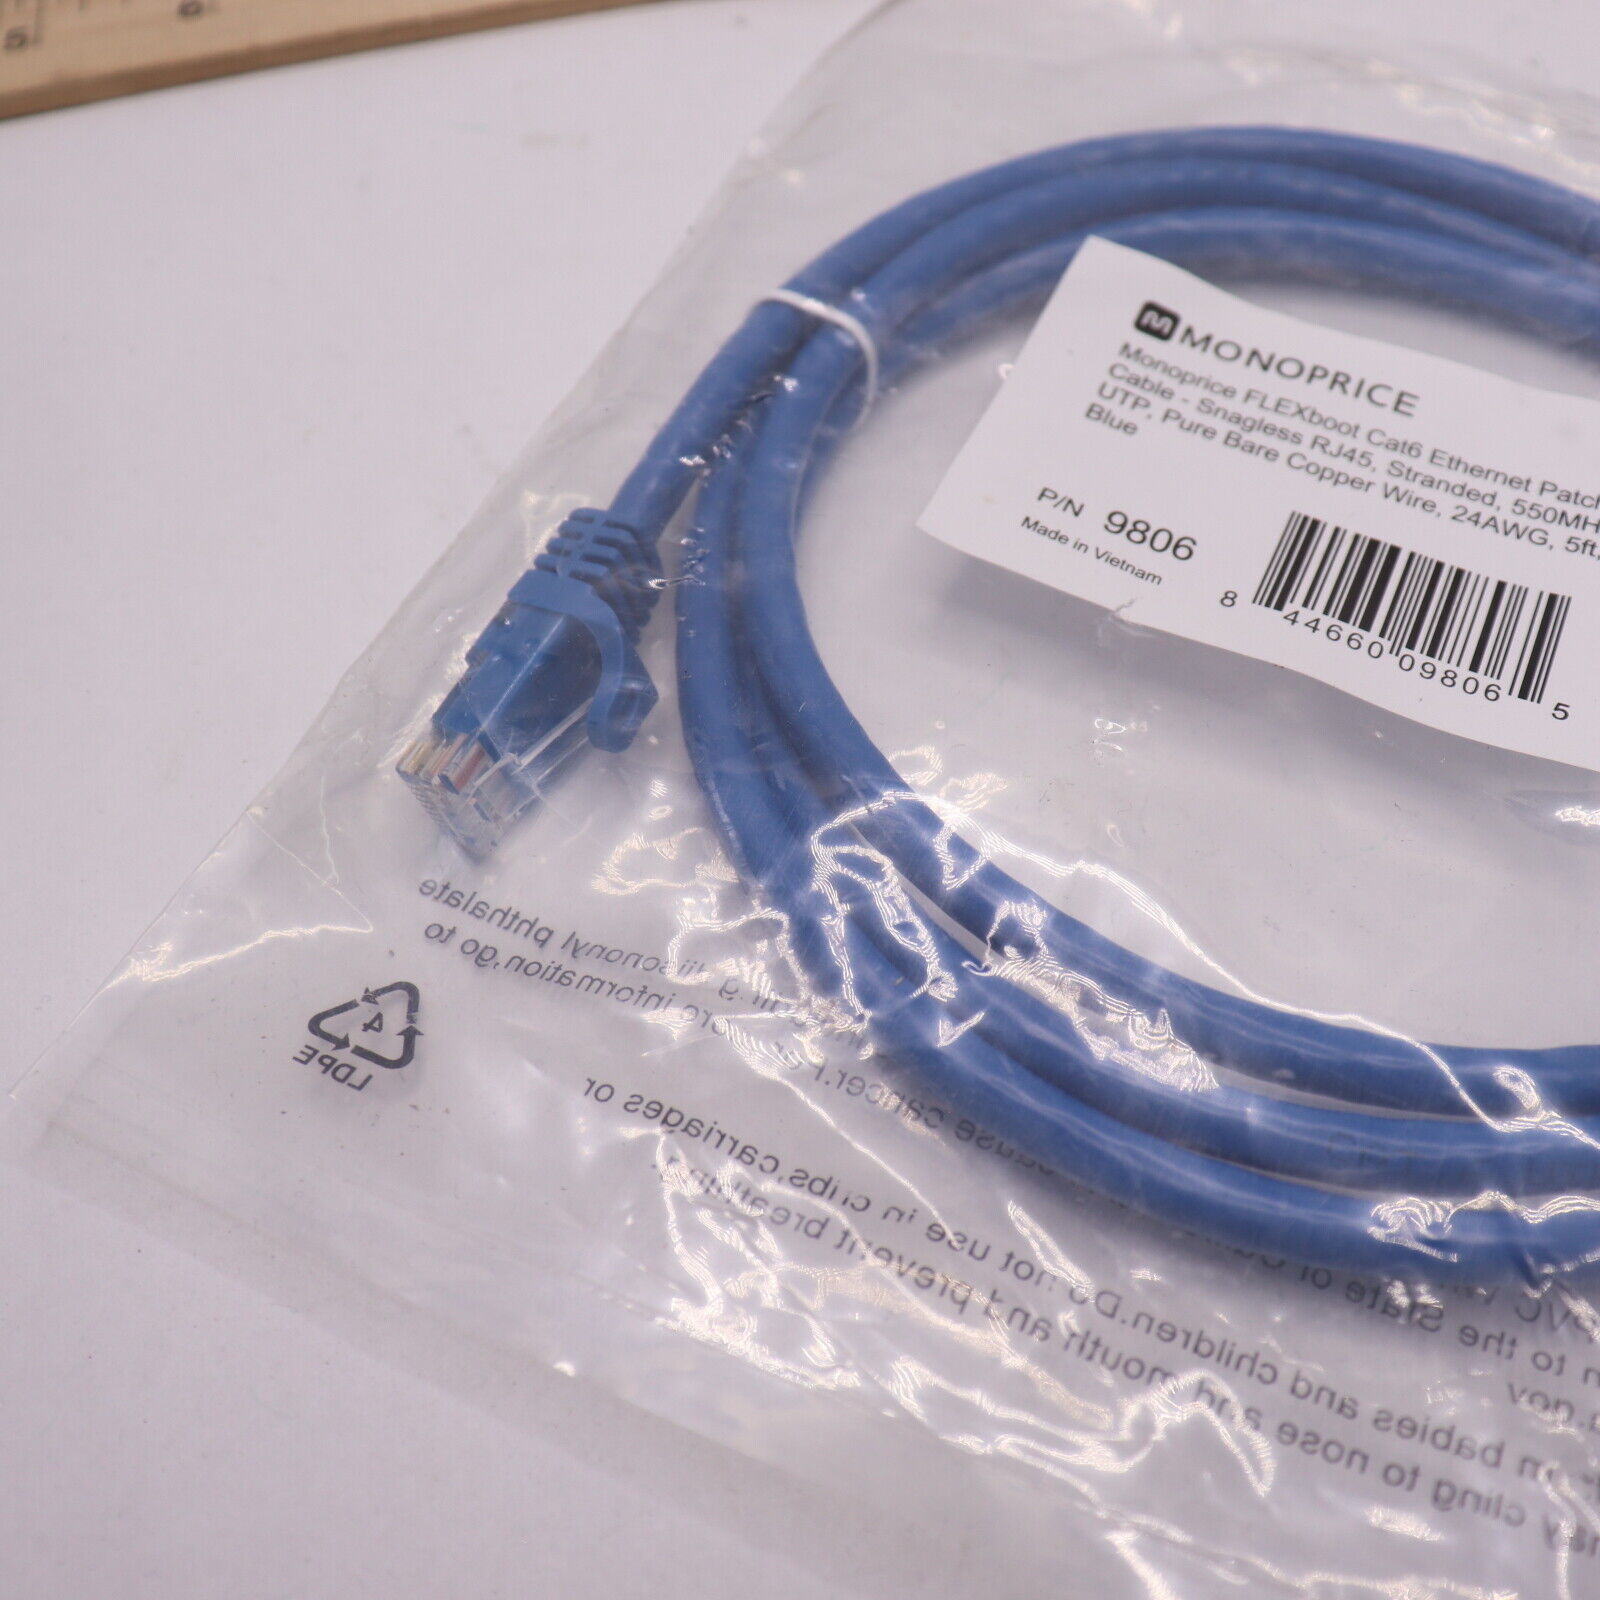 Monoprice Flexboot Cat6 Ethernet Patch Cable Stranded RJ45 Blue 24 AWG 5' 109806